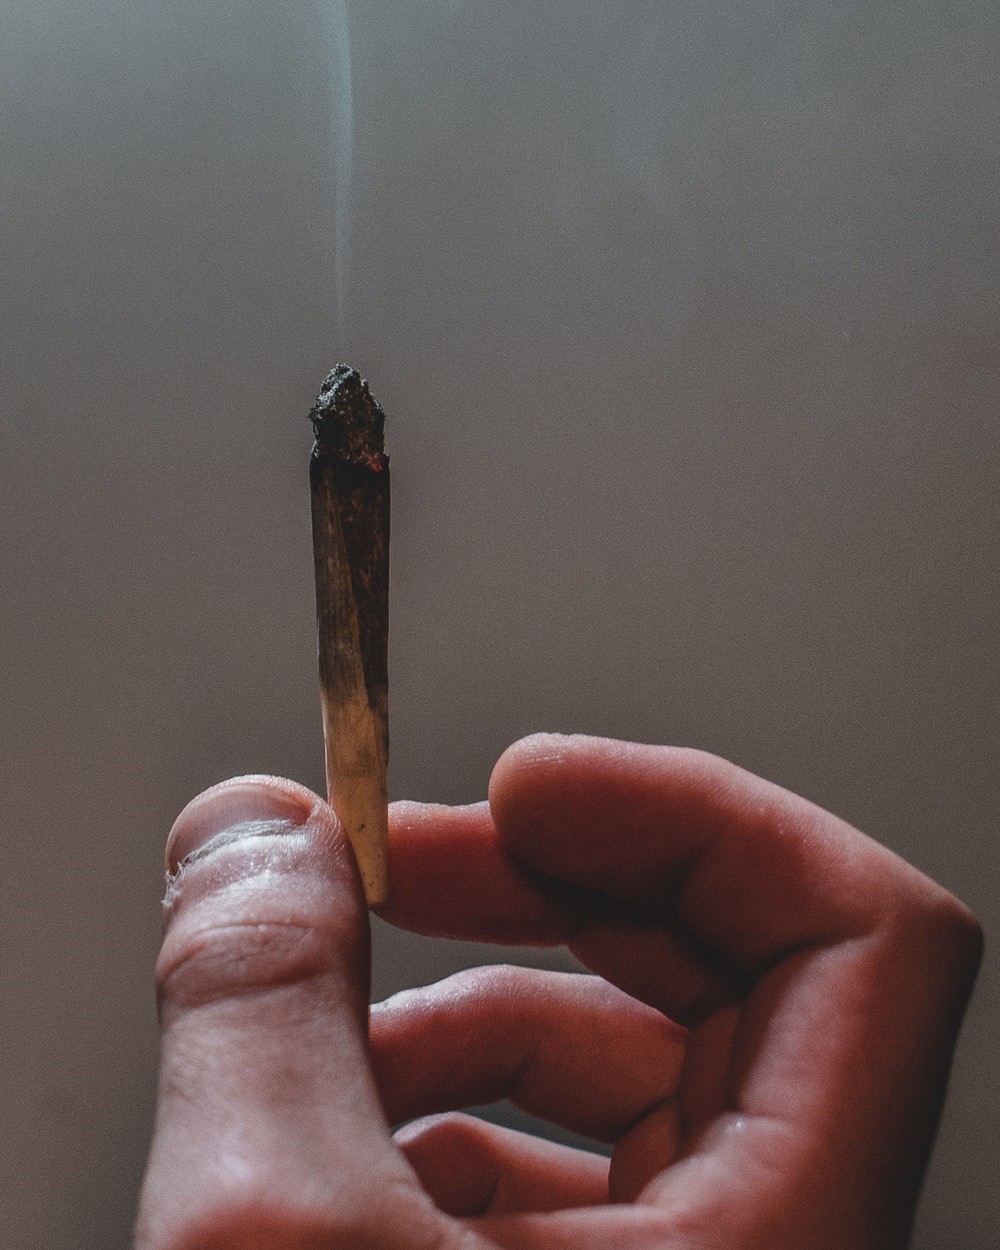 A hand holding a lit up joint